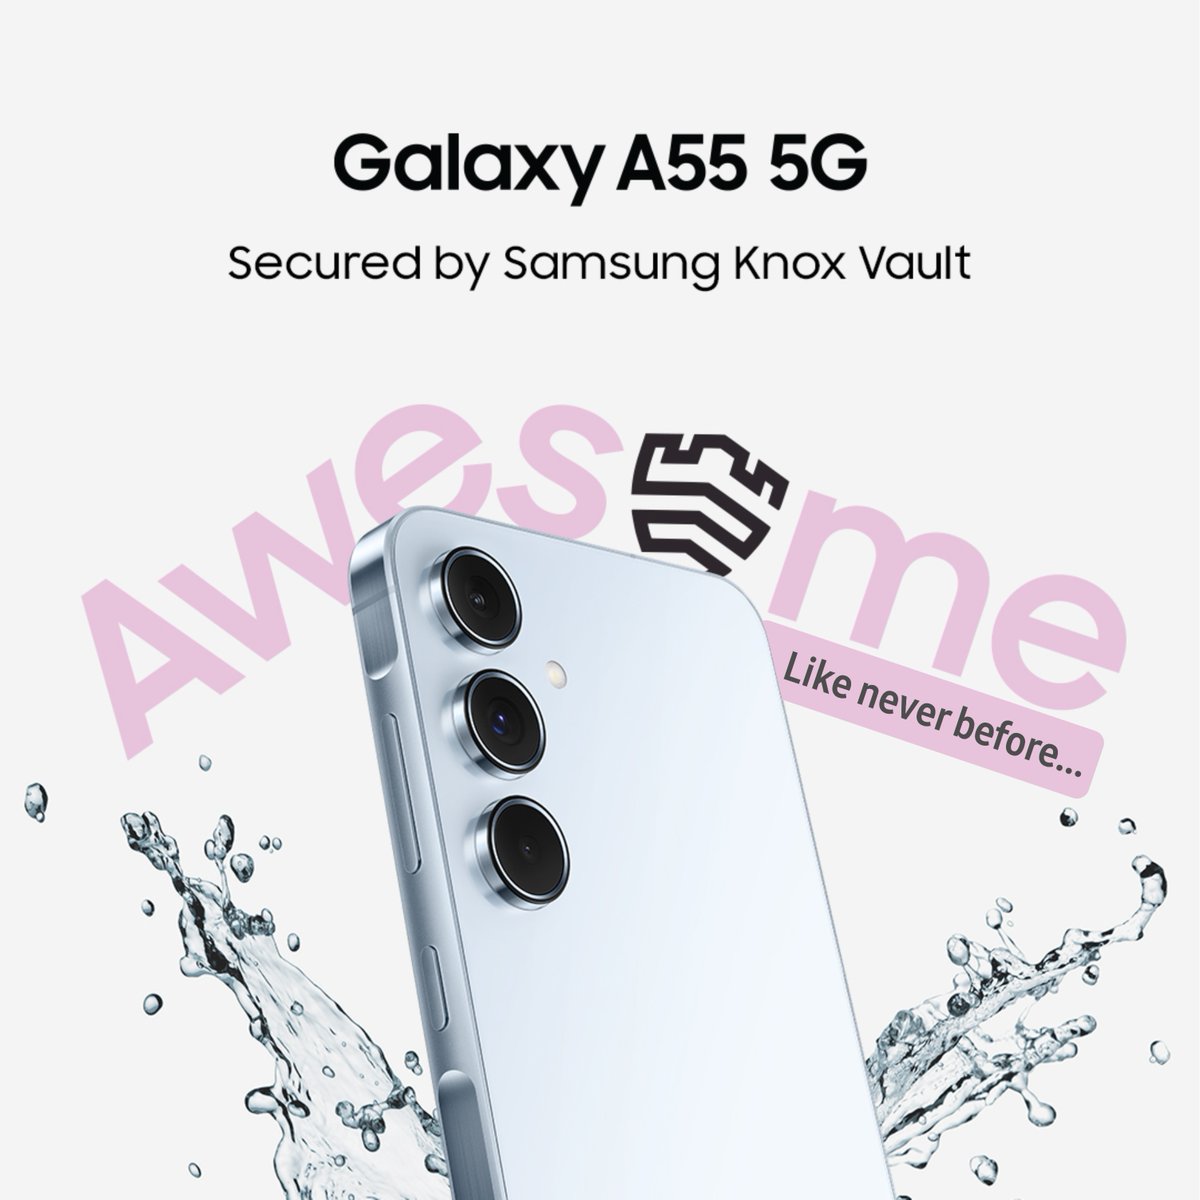 Experience enhanced encryption, face recognition, and a 5-year security update, all on the new Galaxy A55 5G.

Now available at a Samsung authorized store near you.

#GalaxyA55 5G
#AwesomeLikeNeverBefore.
#SamsungNigeria